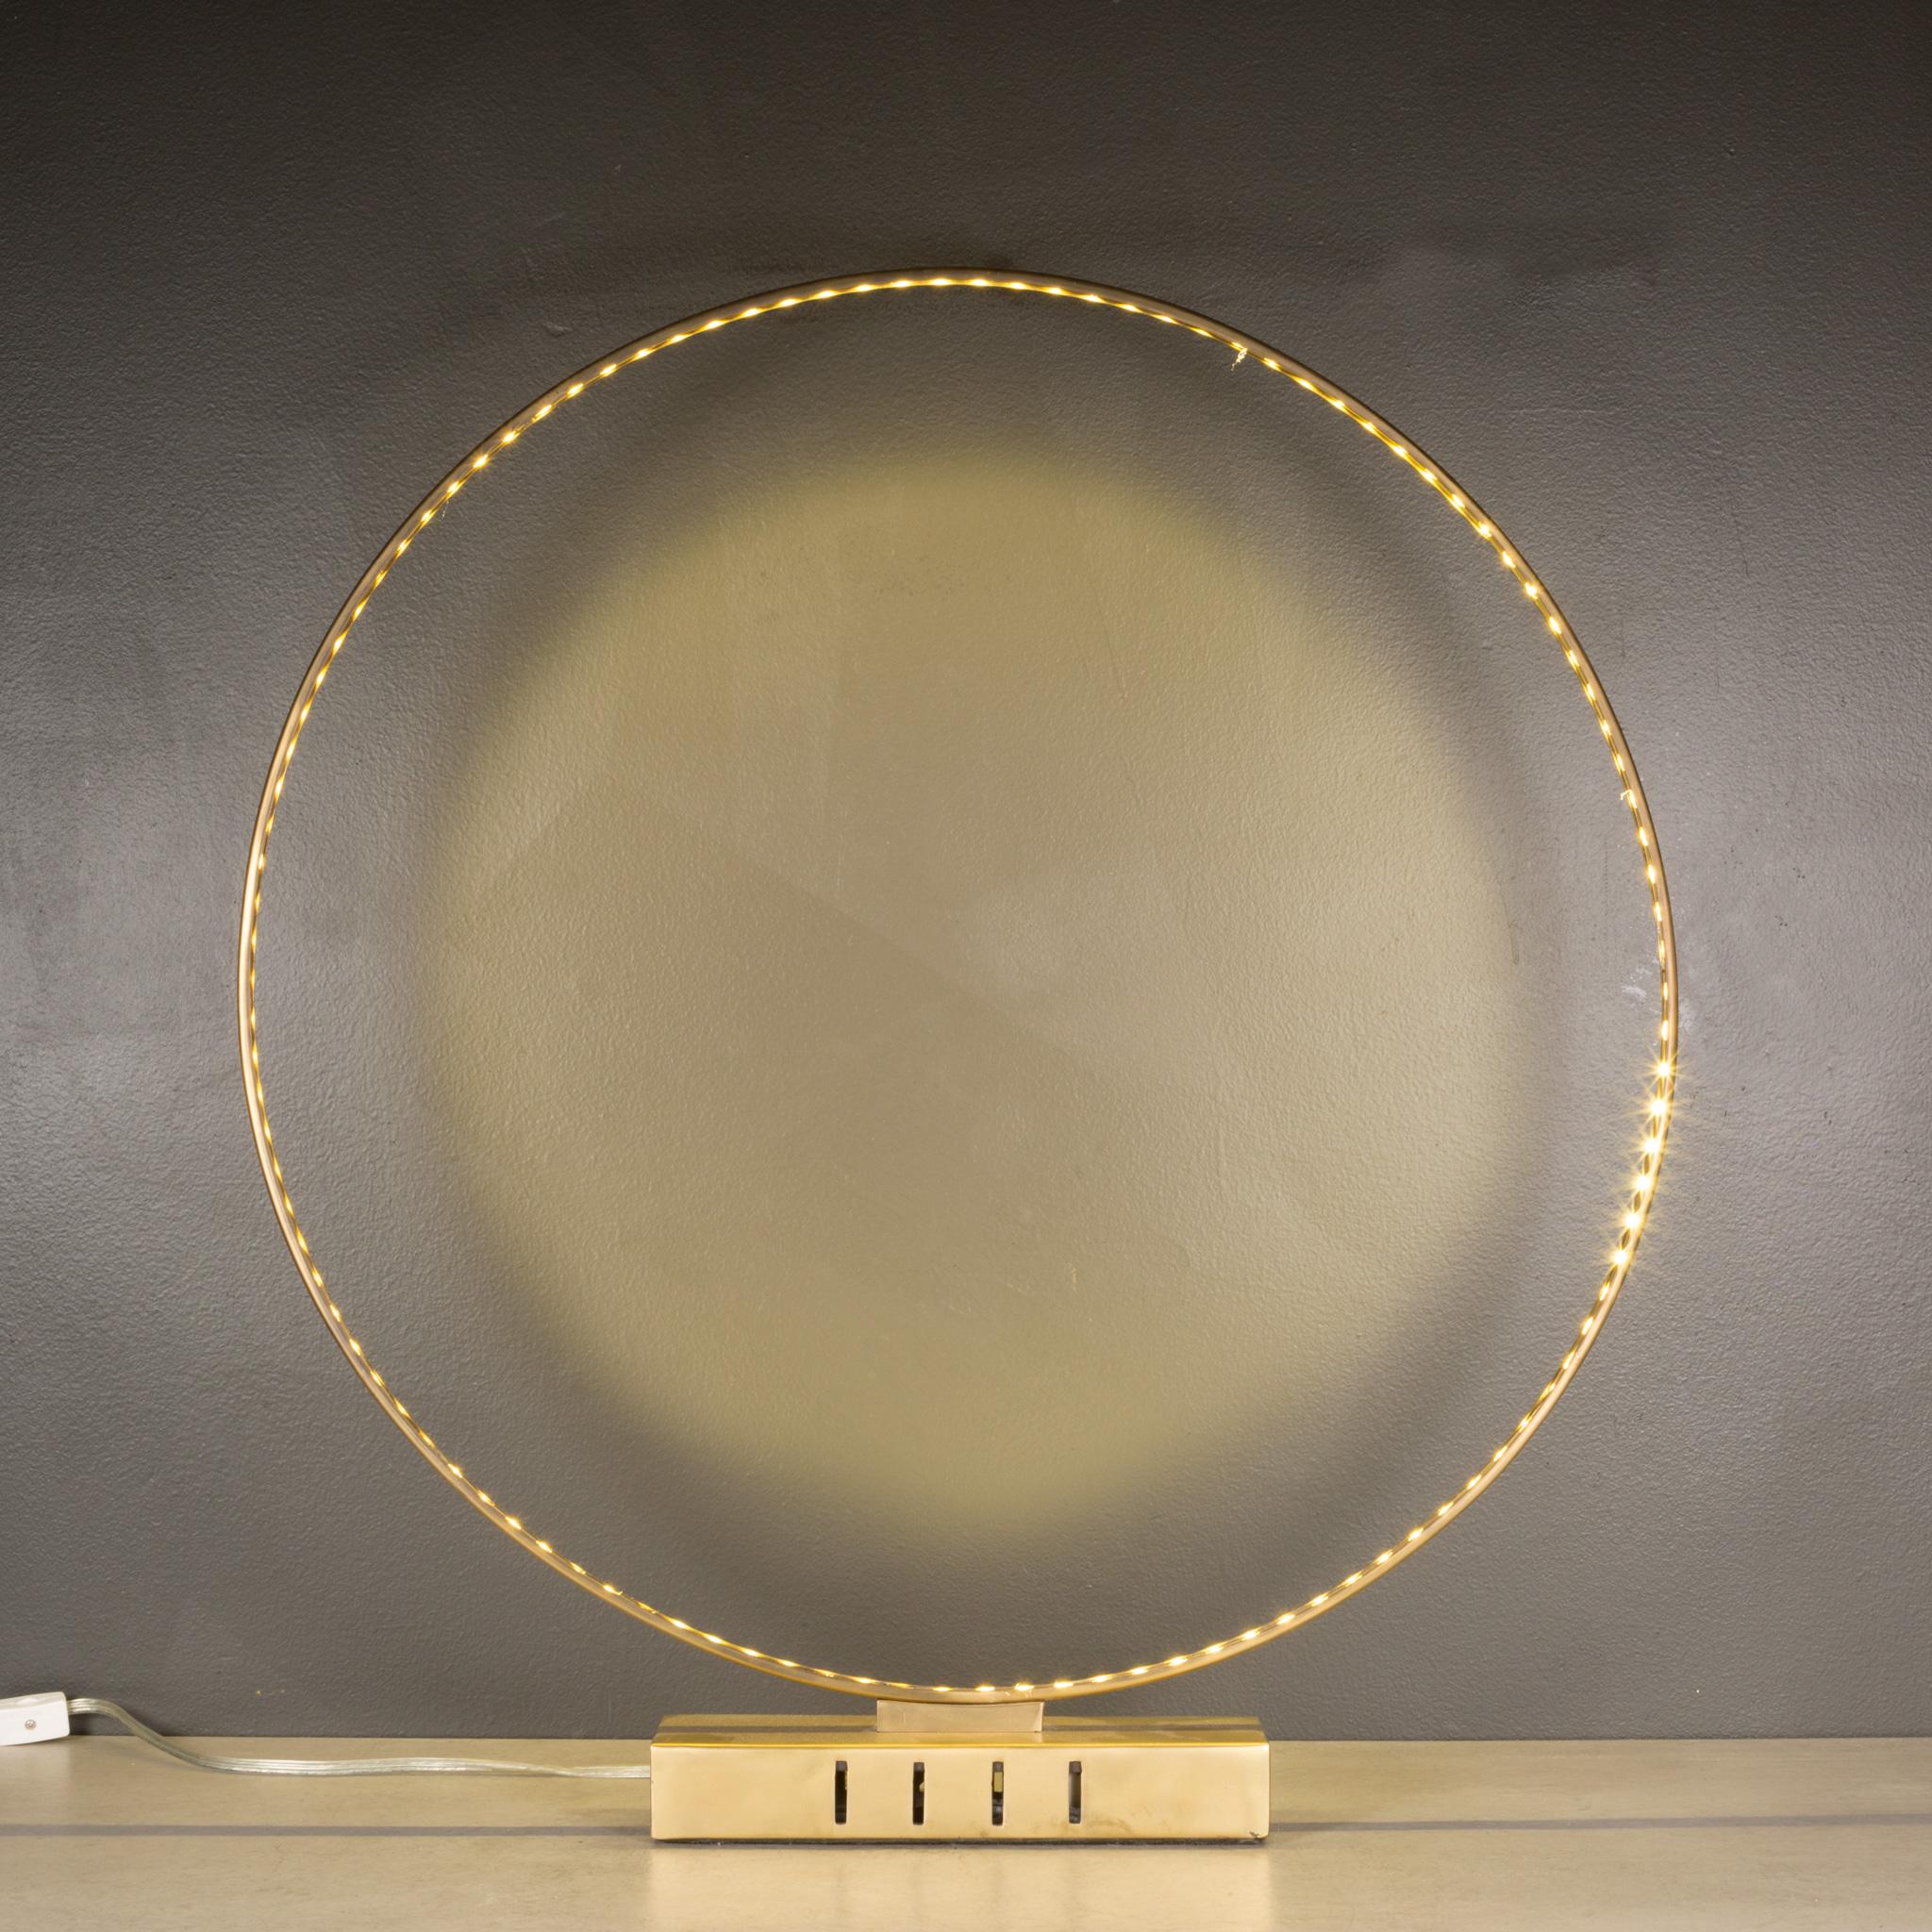 A custom circular brass plated light fixture with LED light around the circumference. 
Wiring is good. 
Lamp works properly.
26